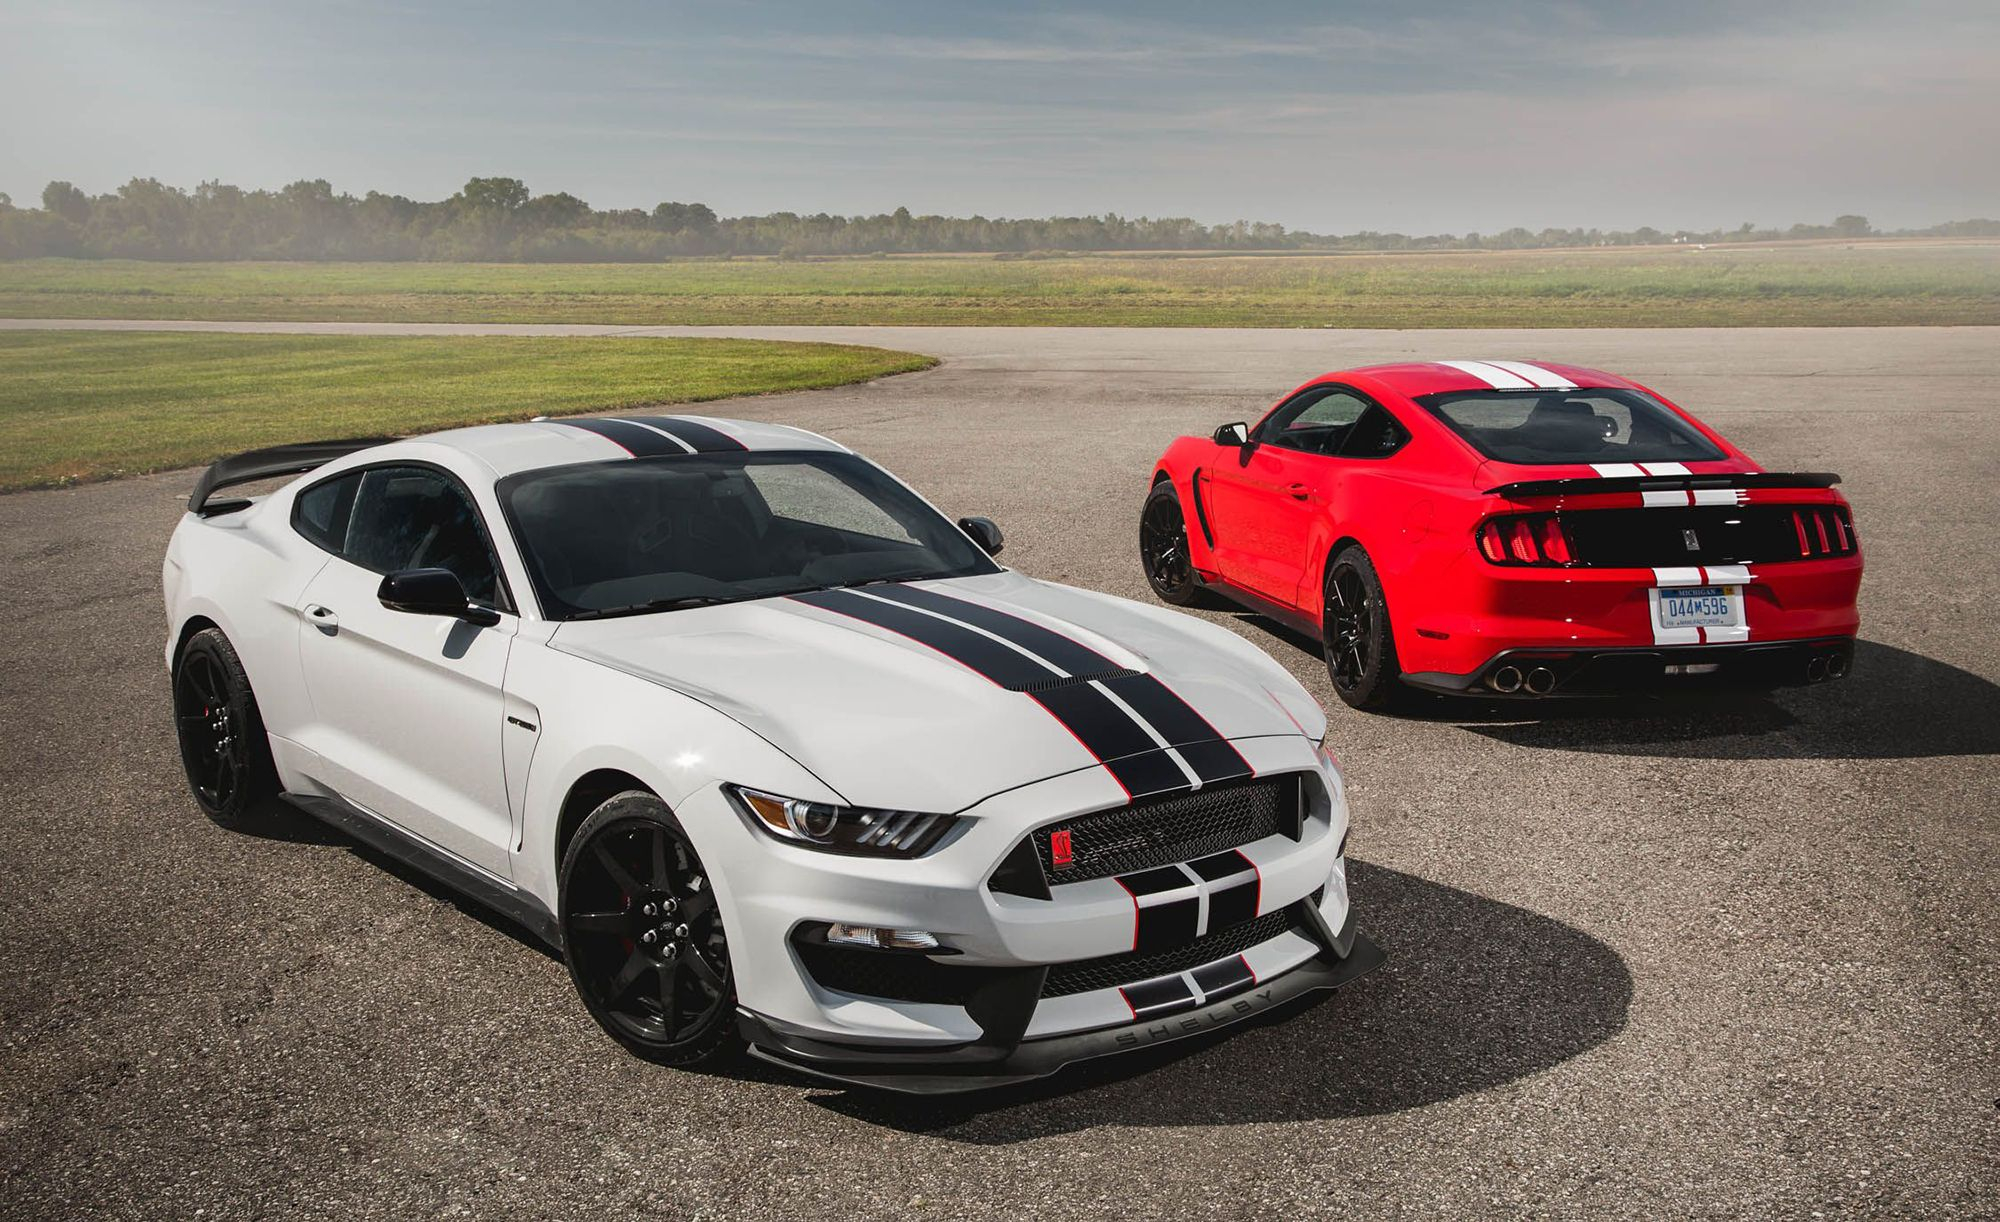 2000x1222 This Week in Cars: Pour One Out for the Mustang GT350